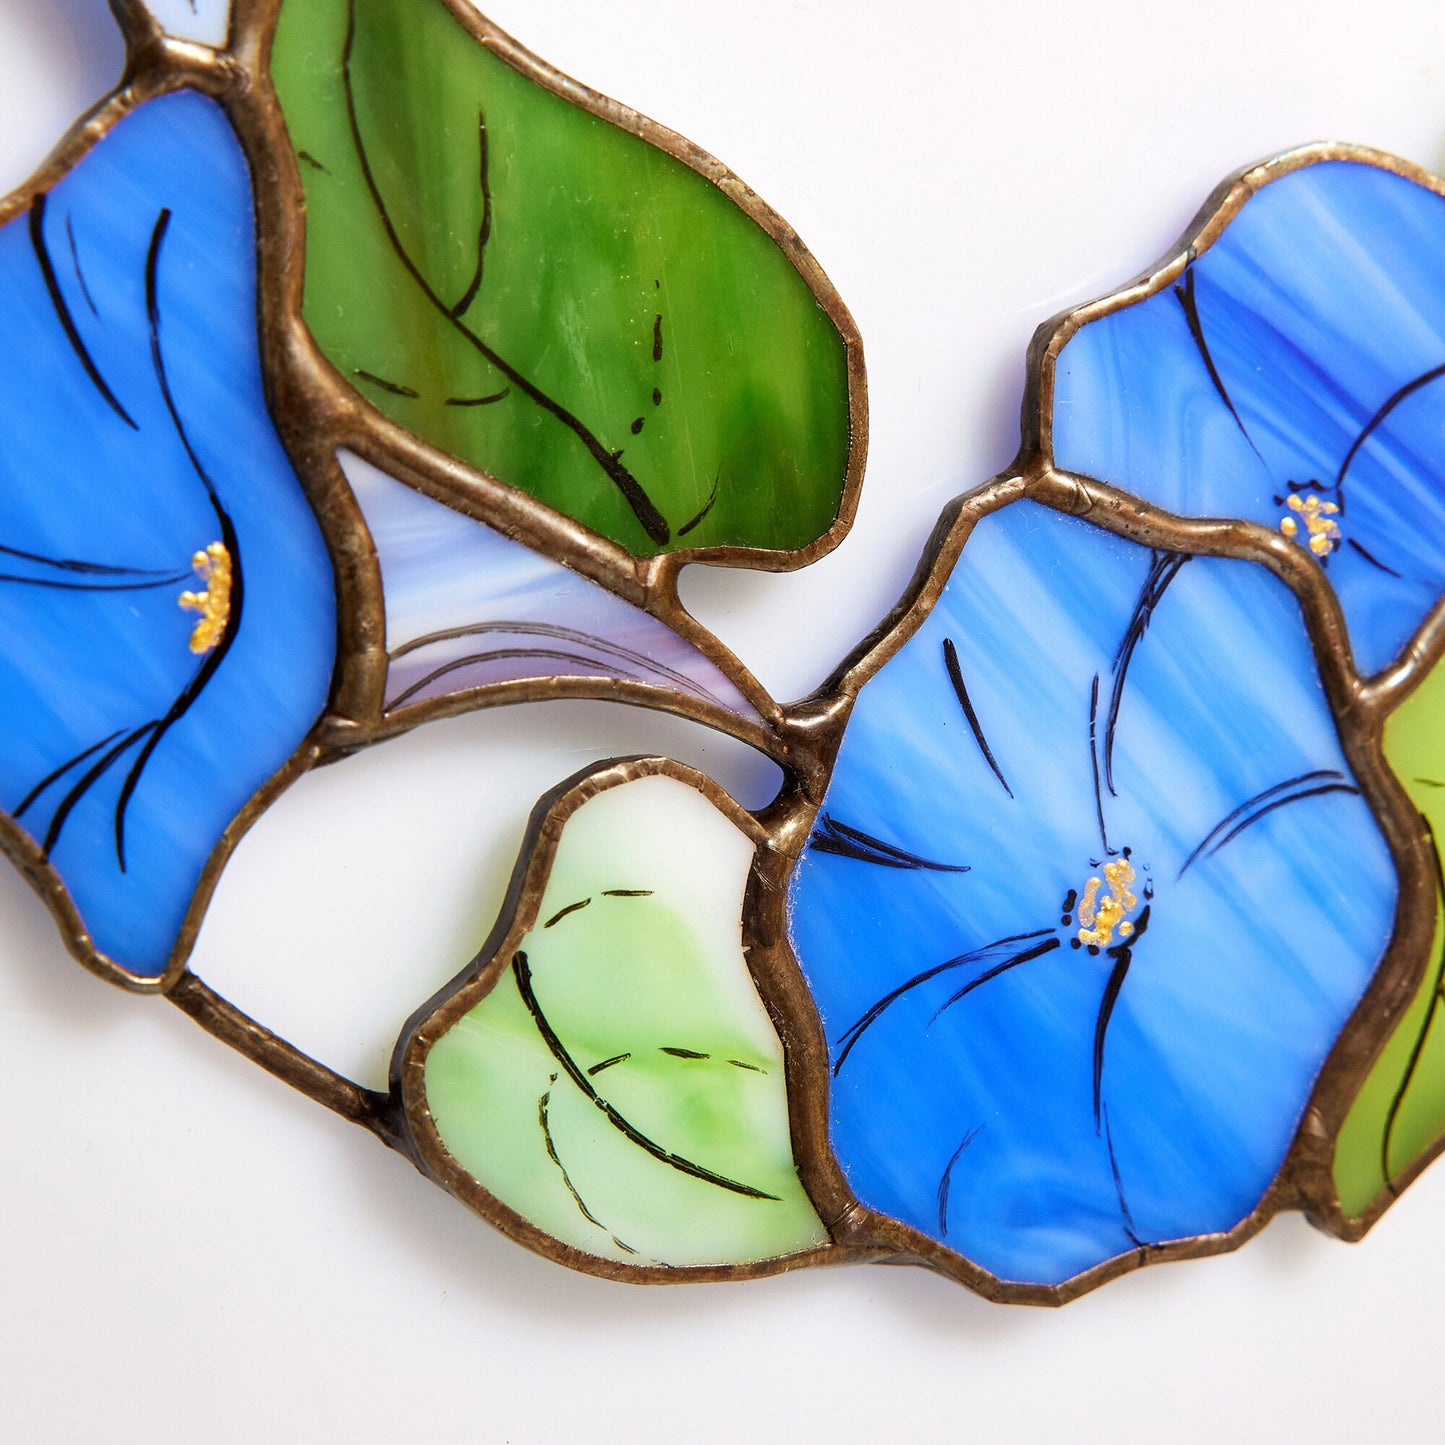 Morning glory Flower Stained Glass Panel